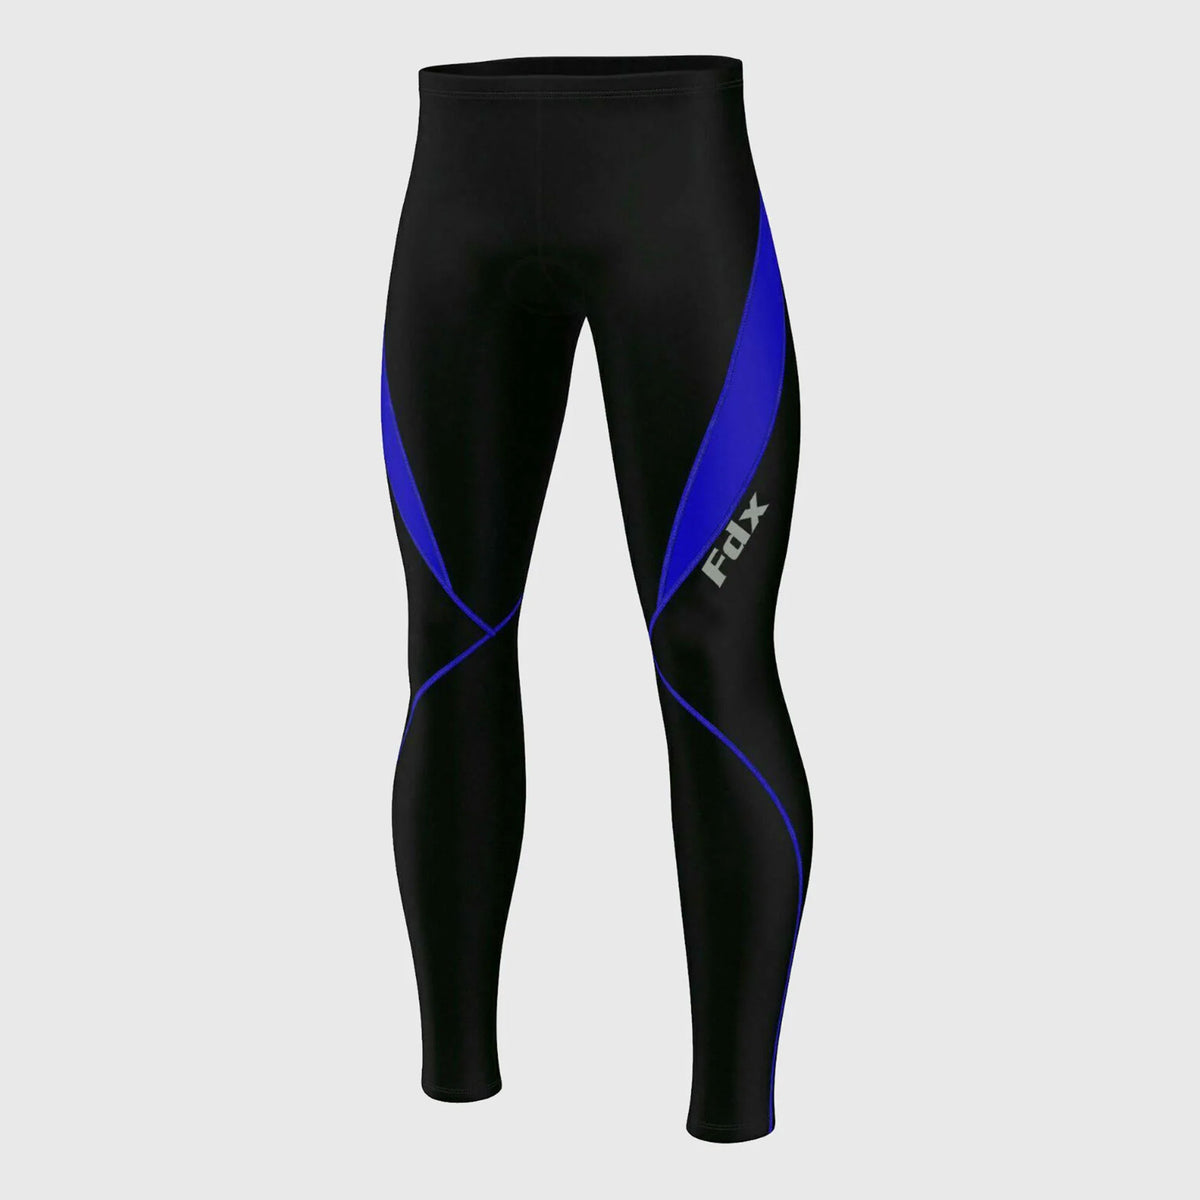 Fdx Heatchaser Men's Compression Cycling Tights Black, Red & Blue